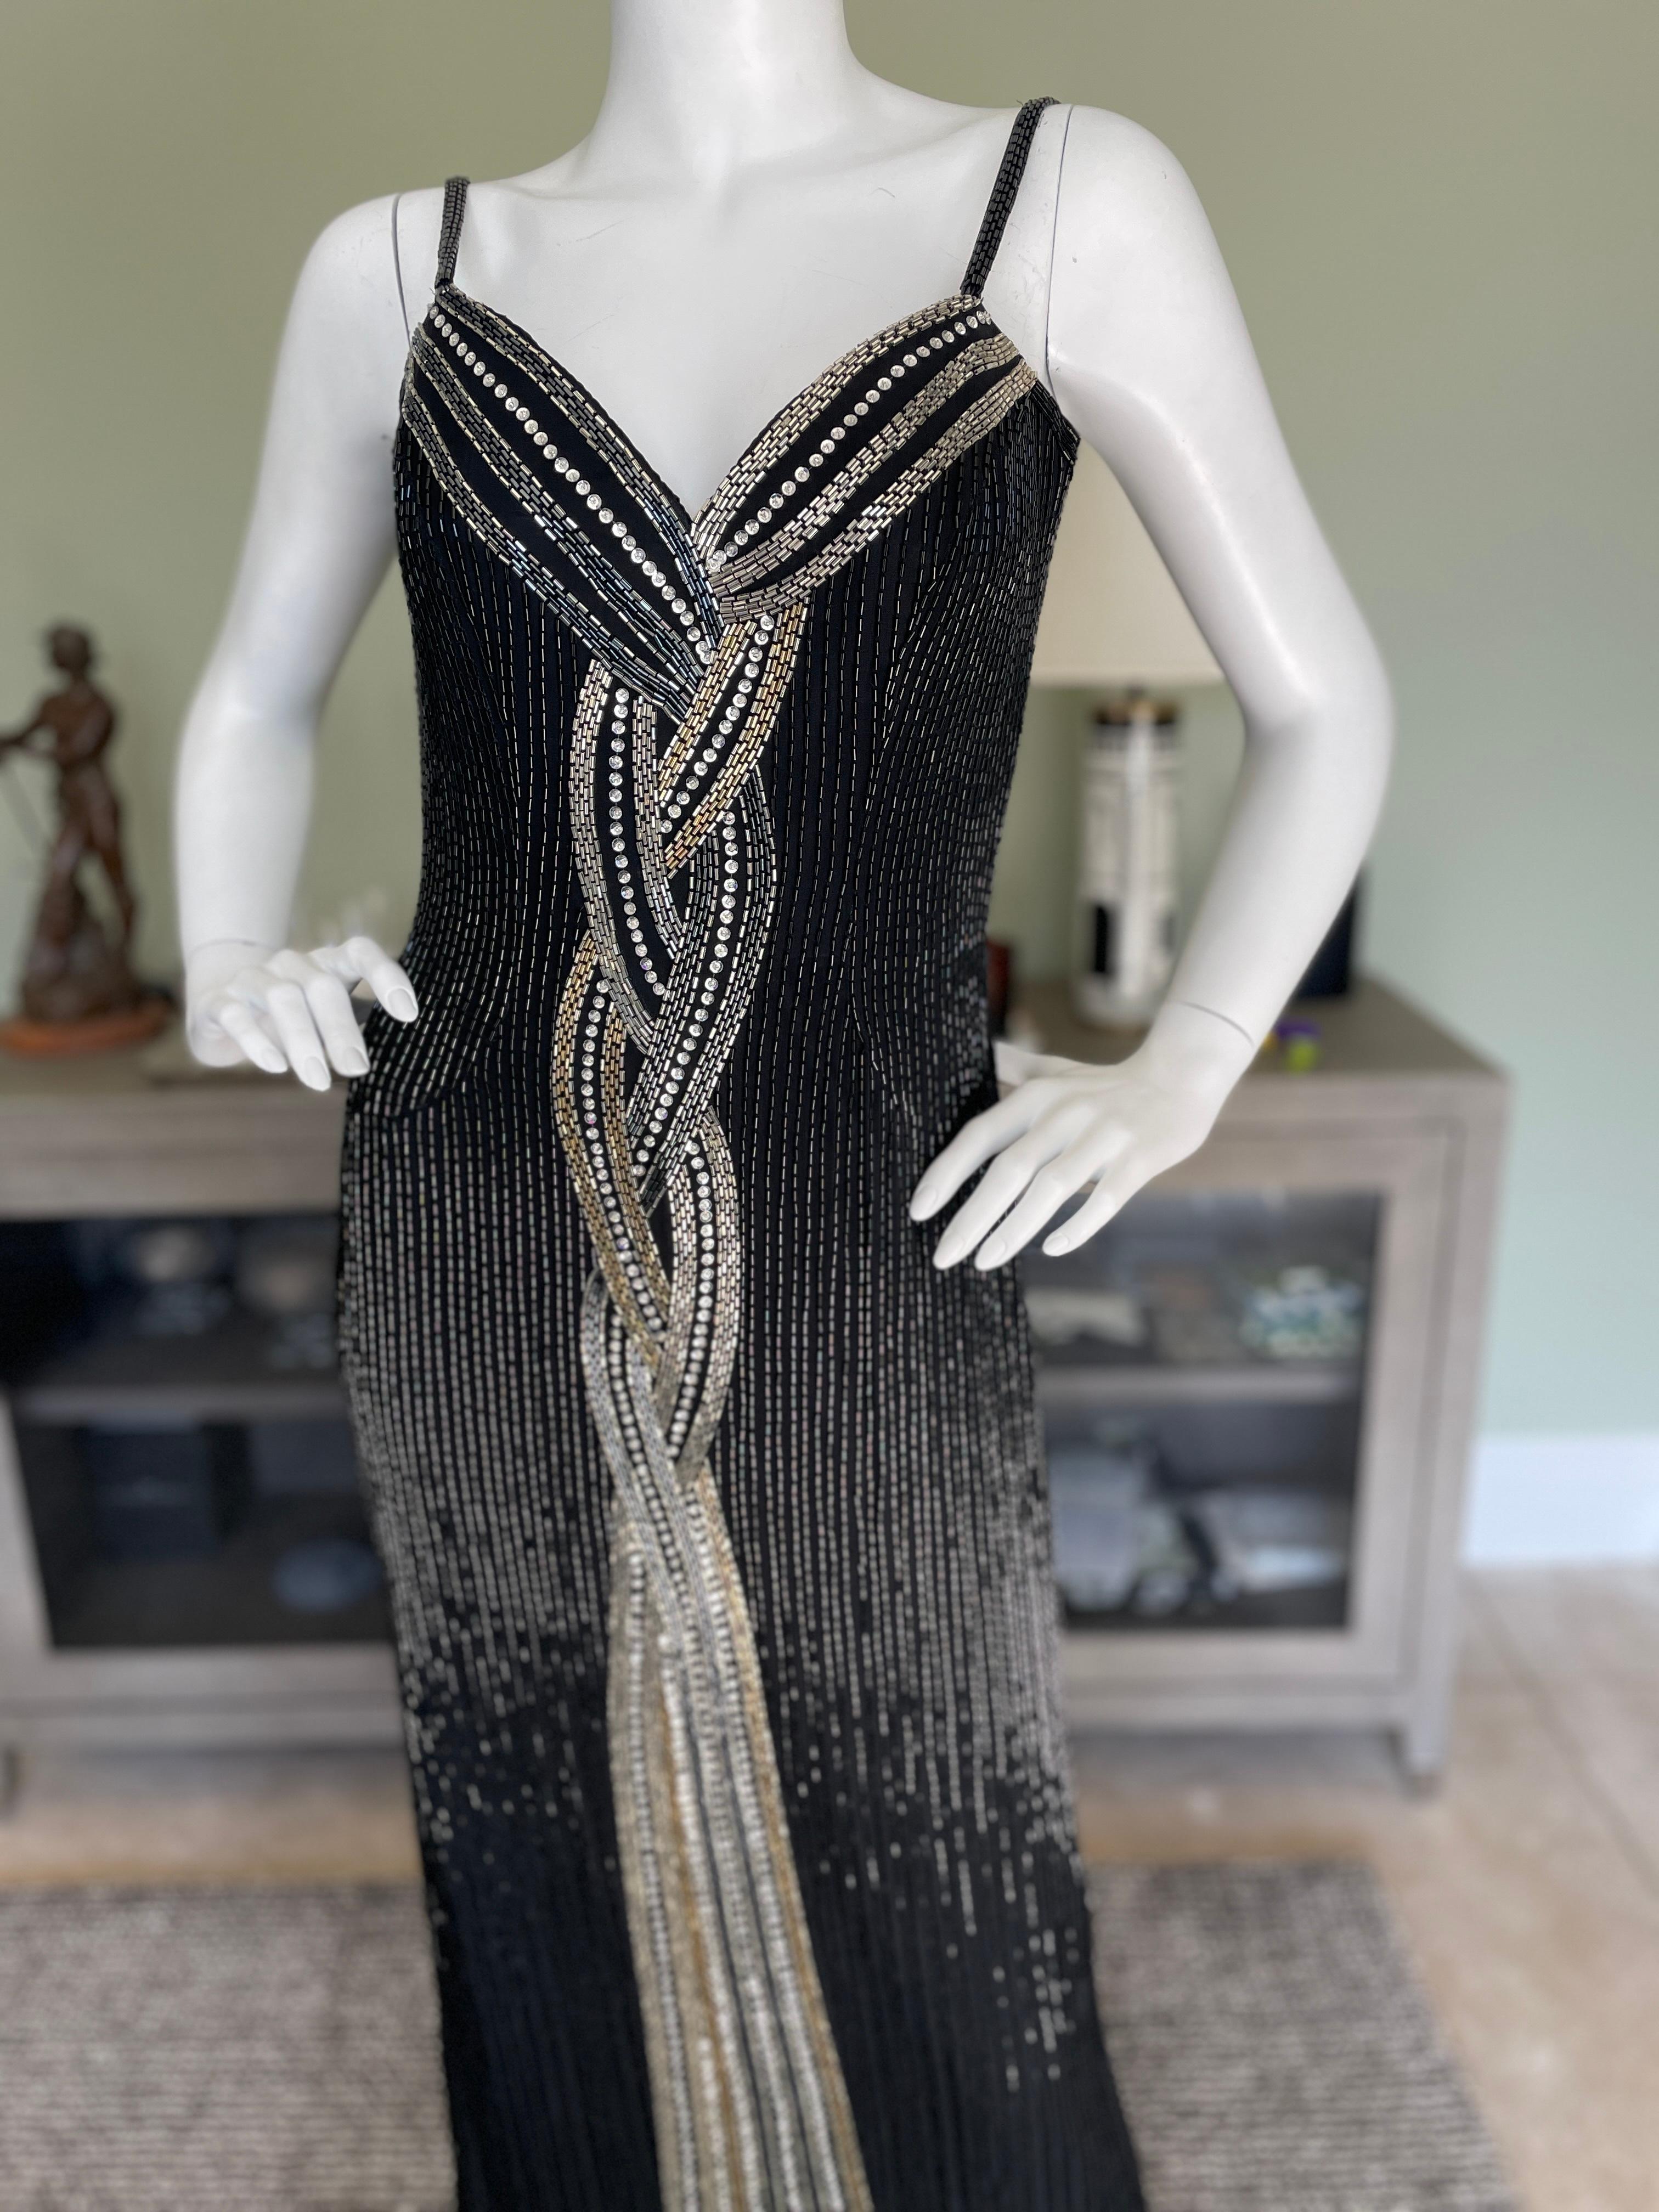 Bob Mackie Vintage 1980's Black Bugle Bead Waterfall Evening Dress In Excellent Condition For Sale In Cloverdale, CA